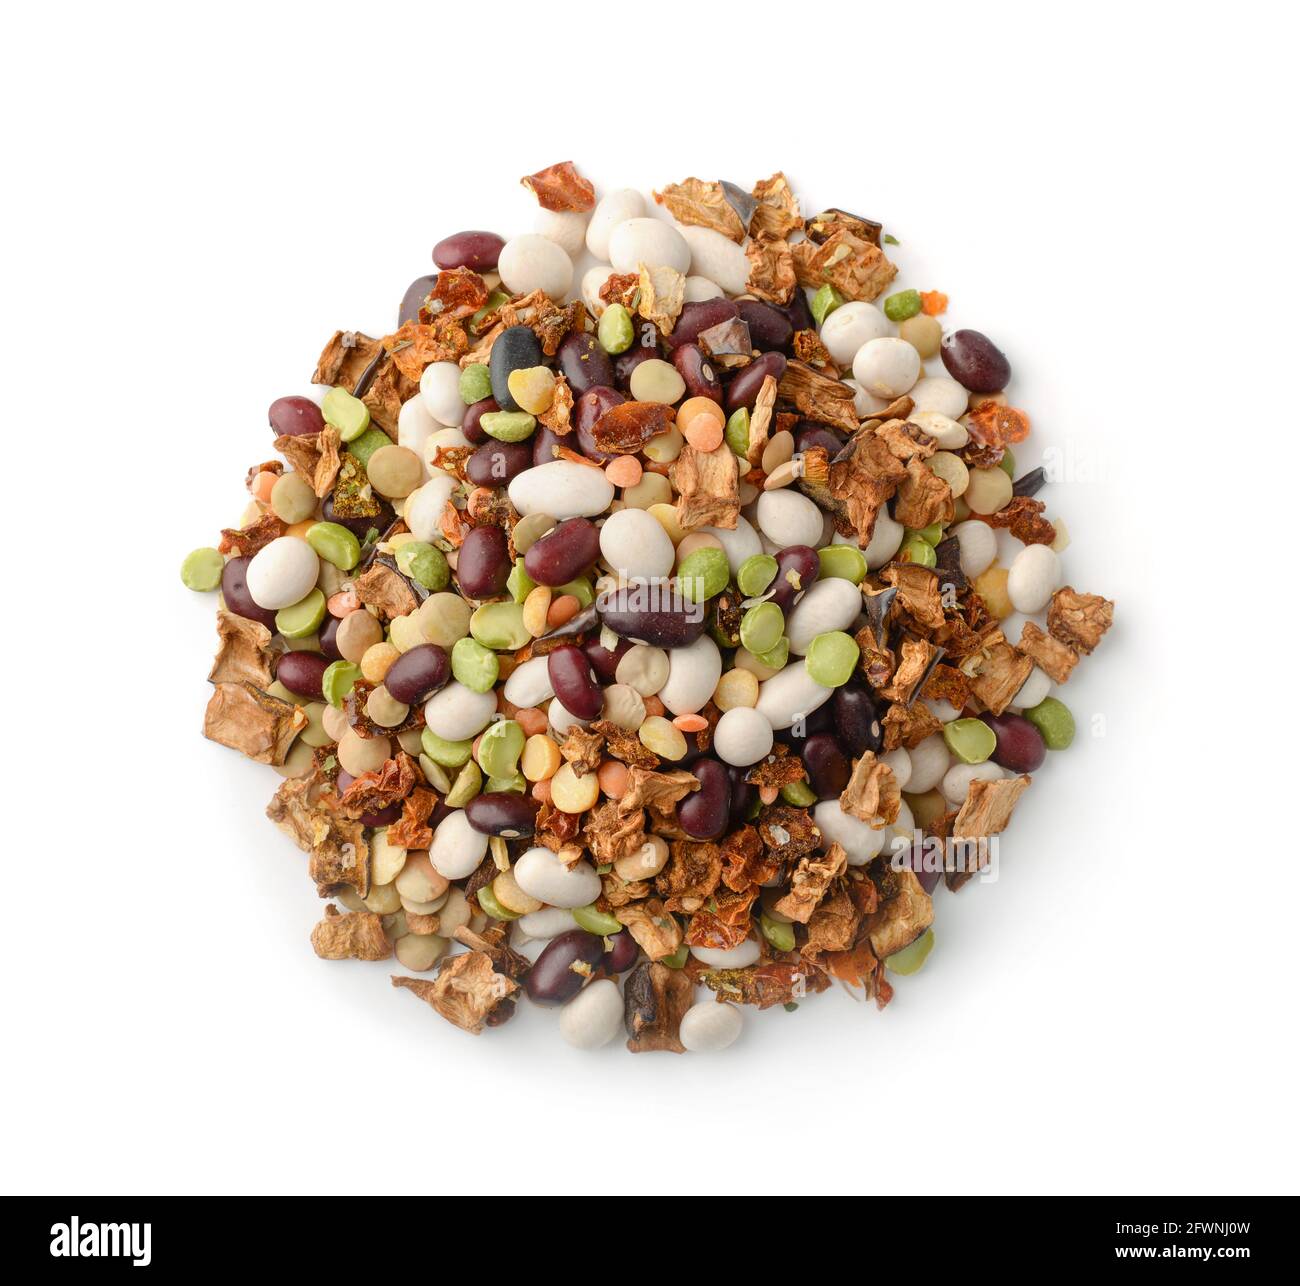 Top view of dry beans and vegetables soup mix isolated Stock Photo